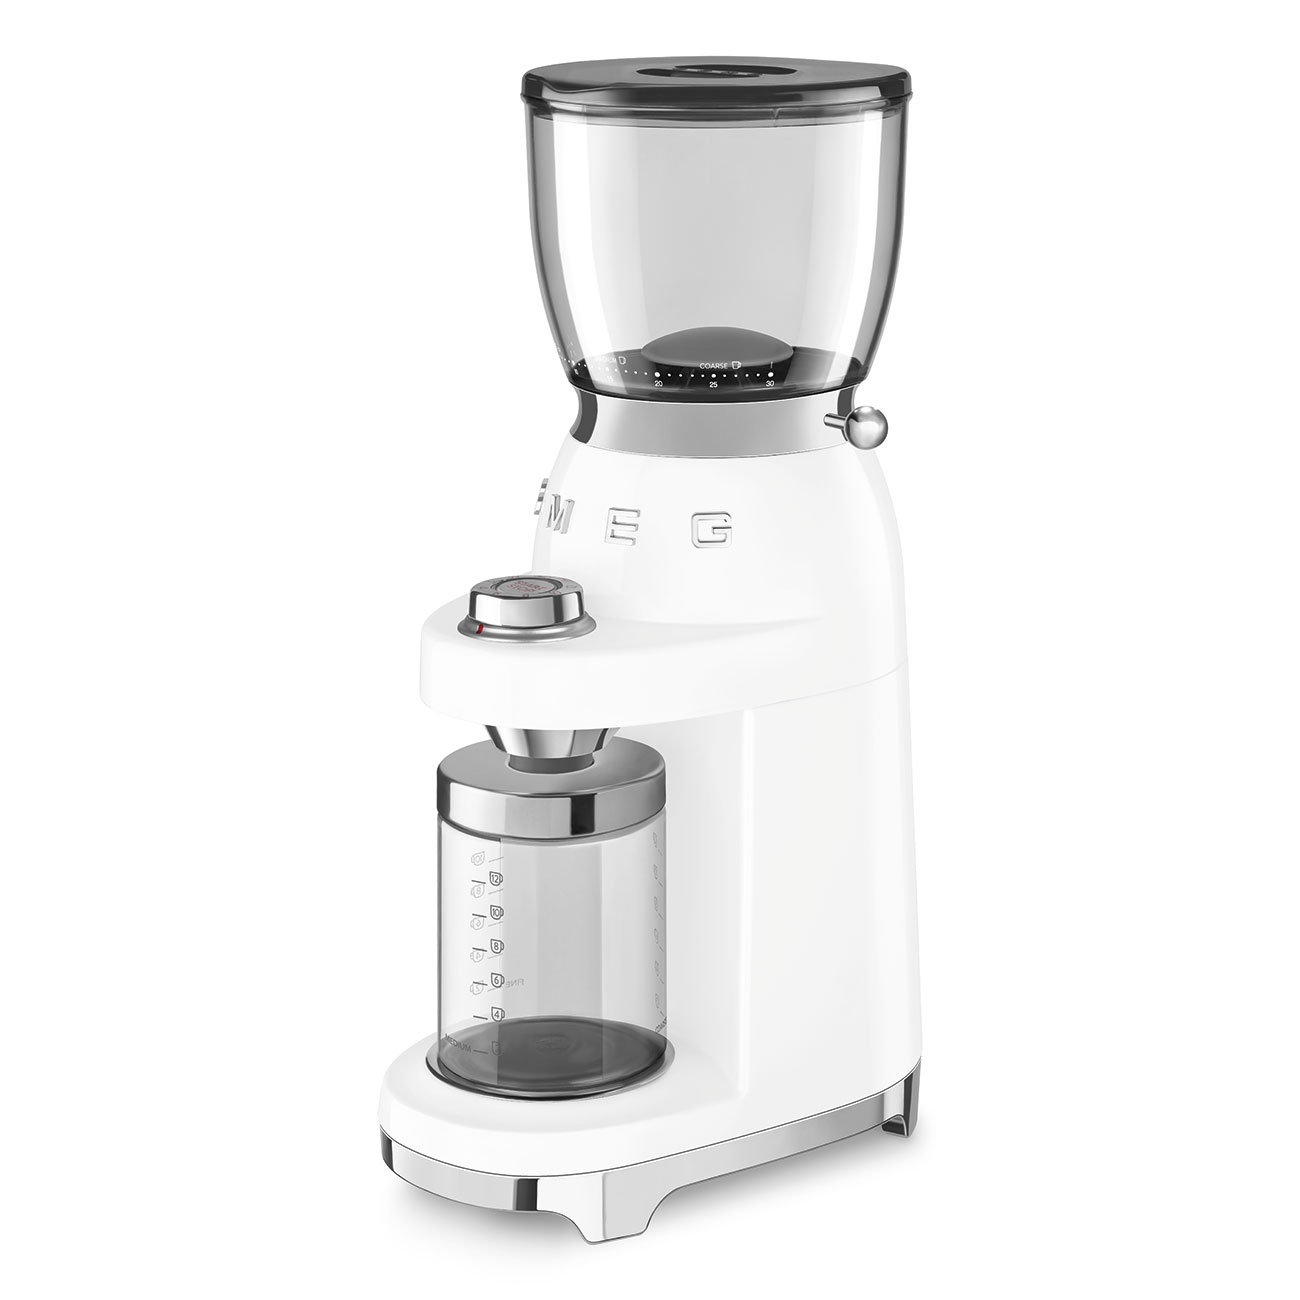 White Coffee Grinder featuring a conical burr - CGF01WHUK - Smeg_7